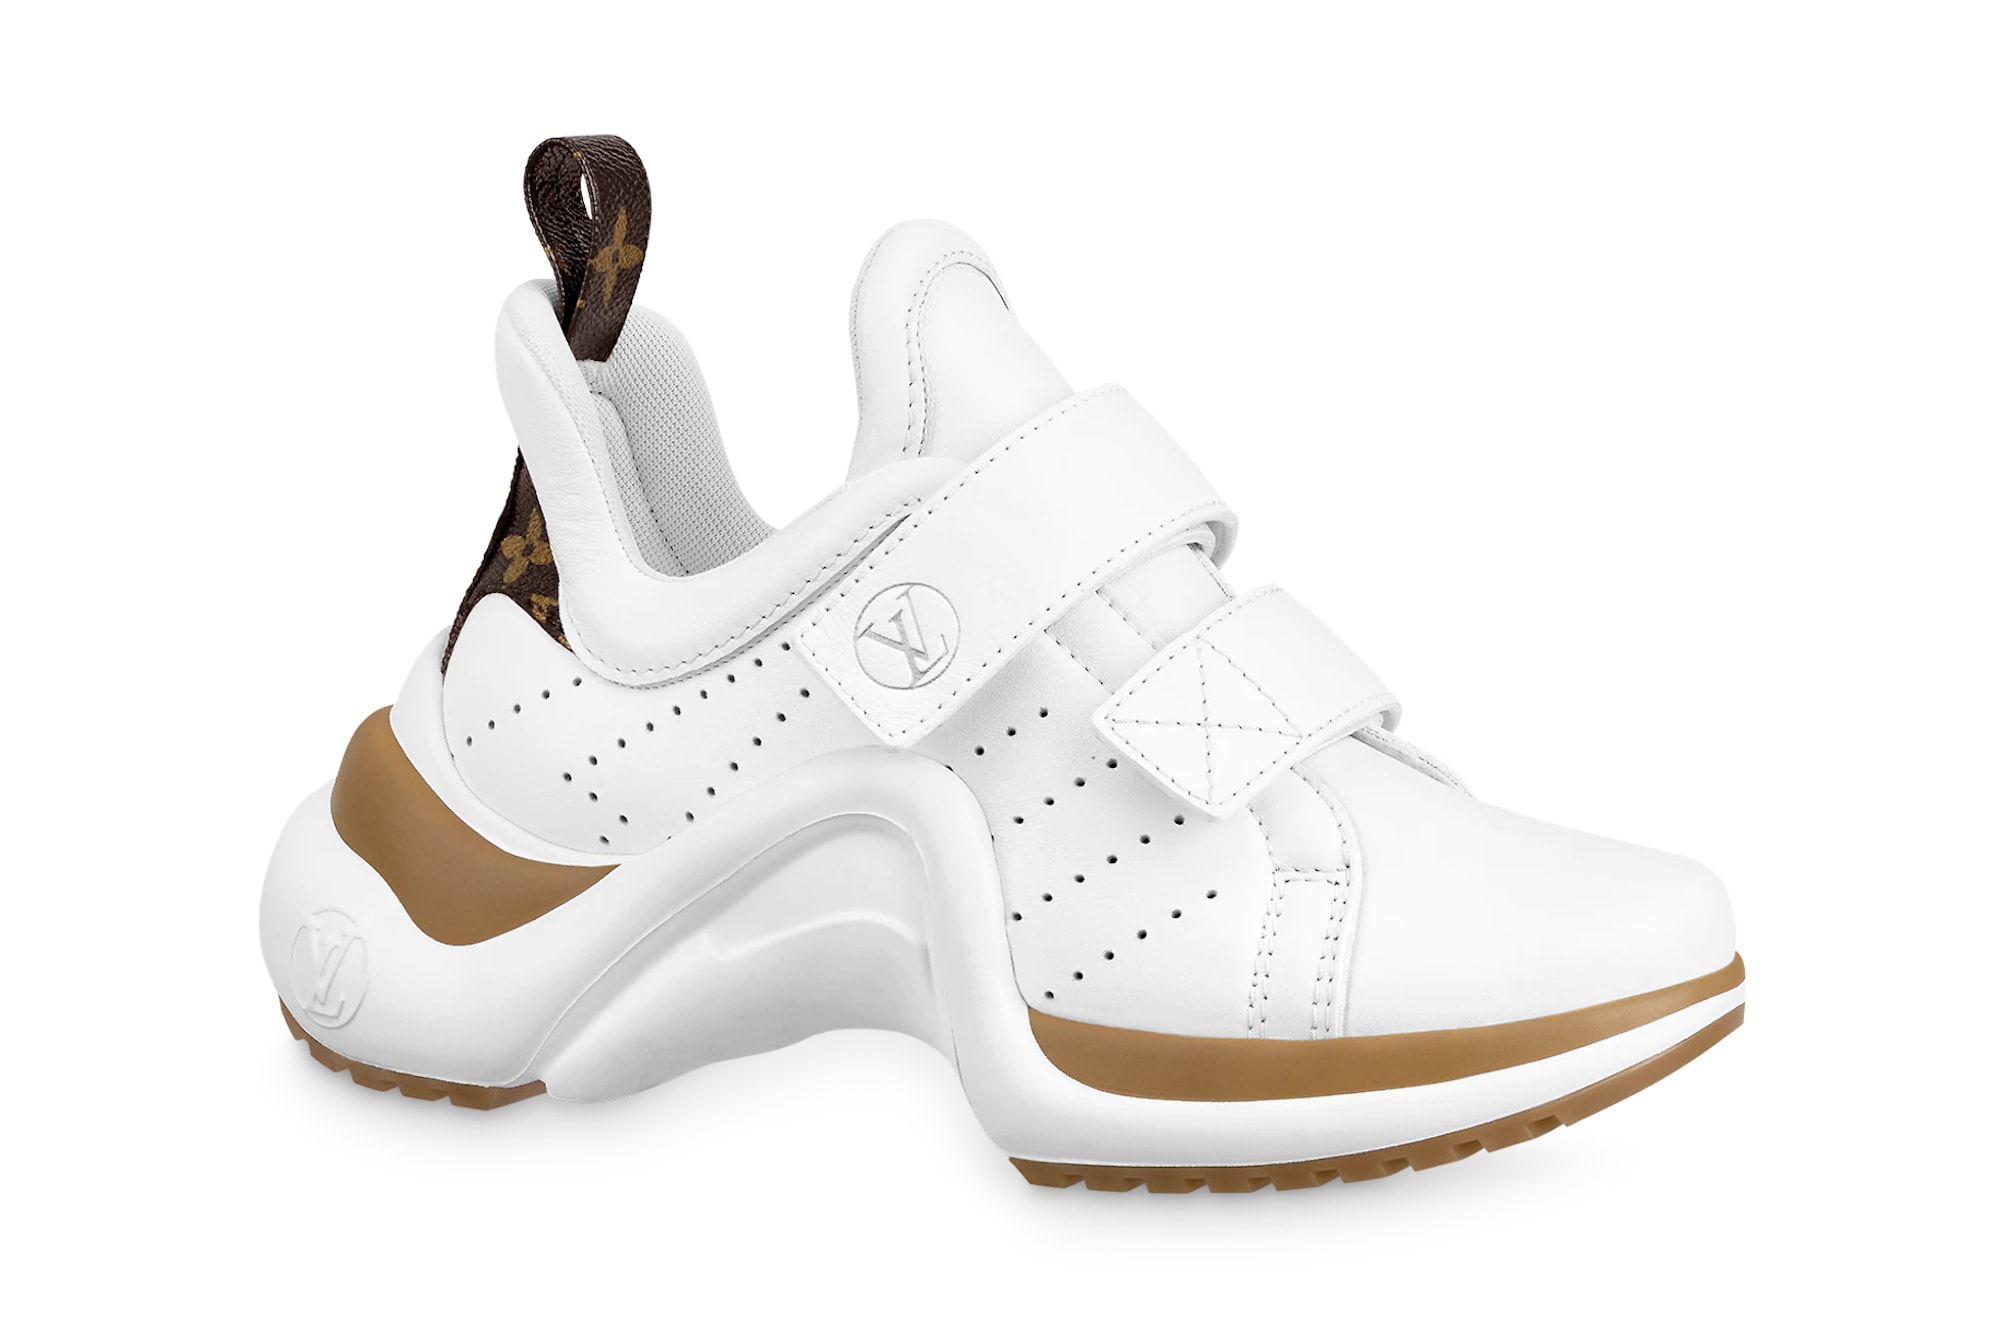 Louis Vuitton unveils a new range of Archlight Sneakers: The LV